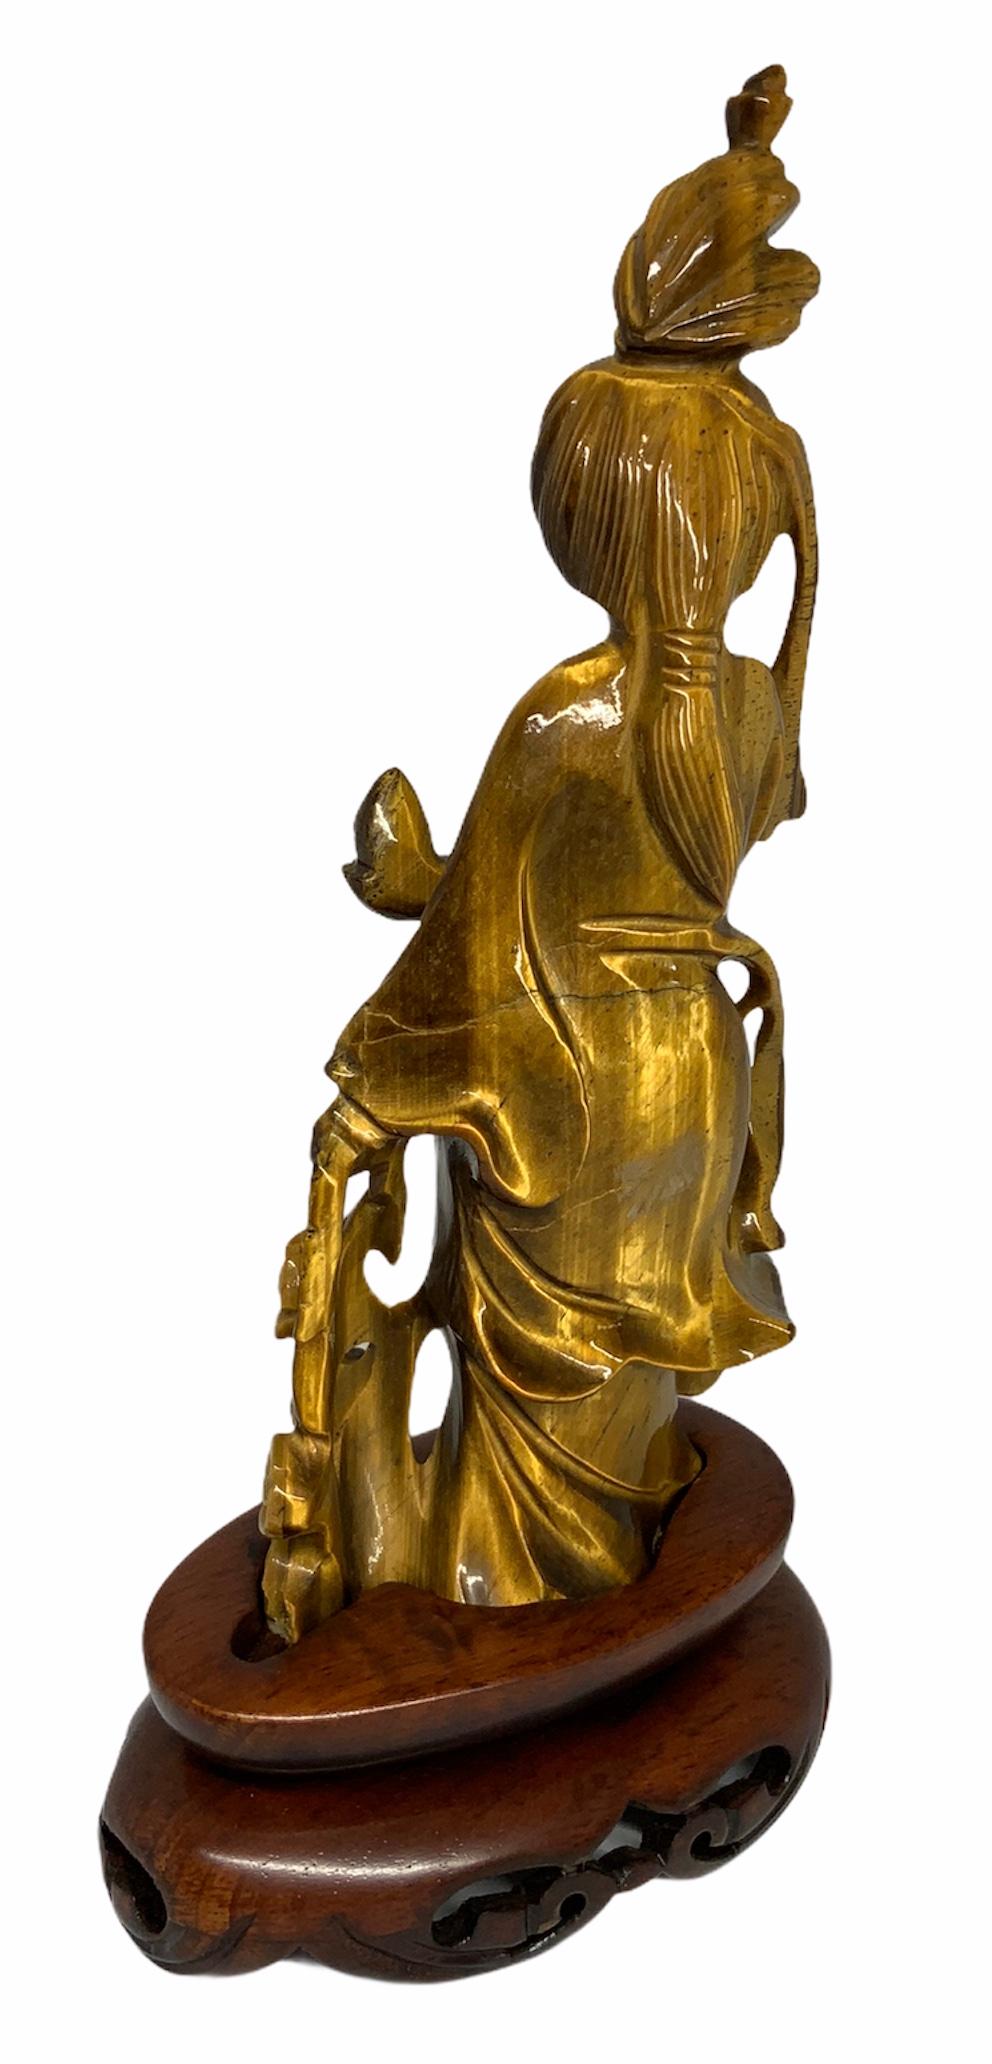 A small sculpture in tiger eye of Guan Yin holding a vase in her right hand and some branches of willow flowers in her left hand. In the Buddhism religion, the vase symbolize good fortune and contain the nectar of life. The willow branches are a